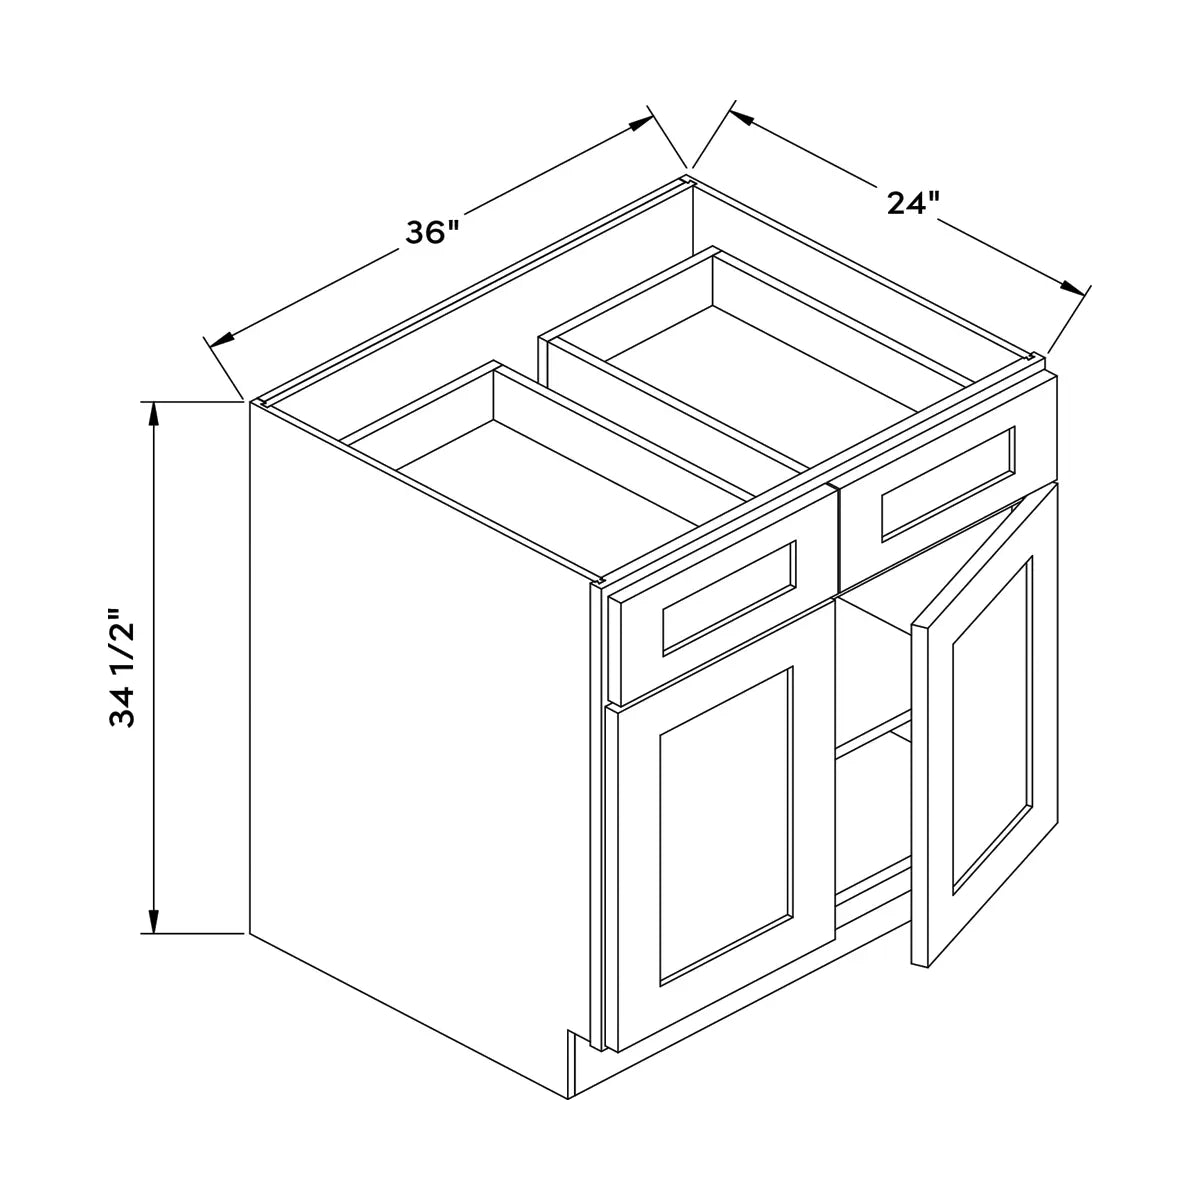 Craft Cabinetry Shaker Aqua 36”W Base Cabinet Image Specifications